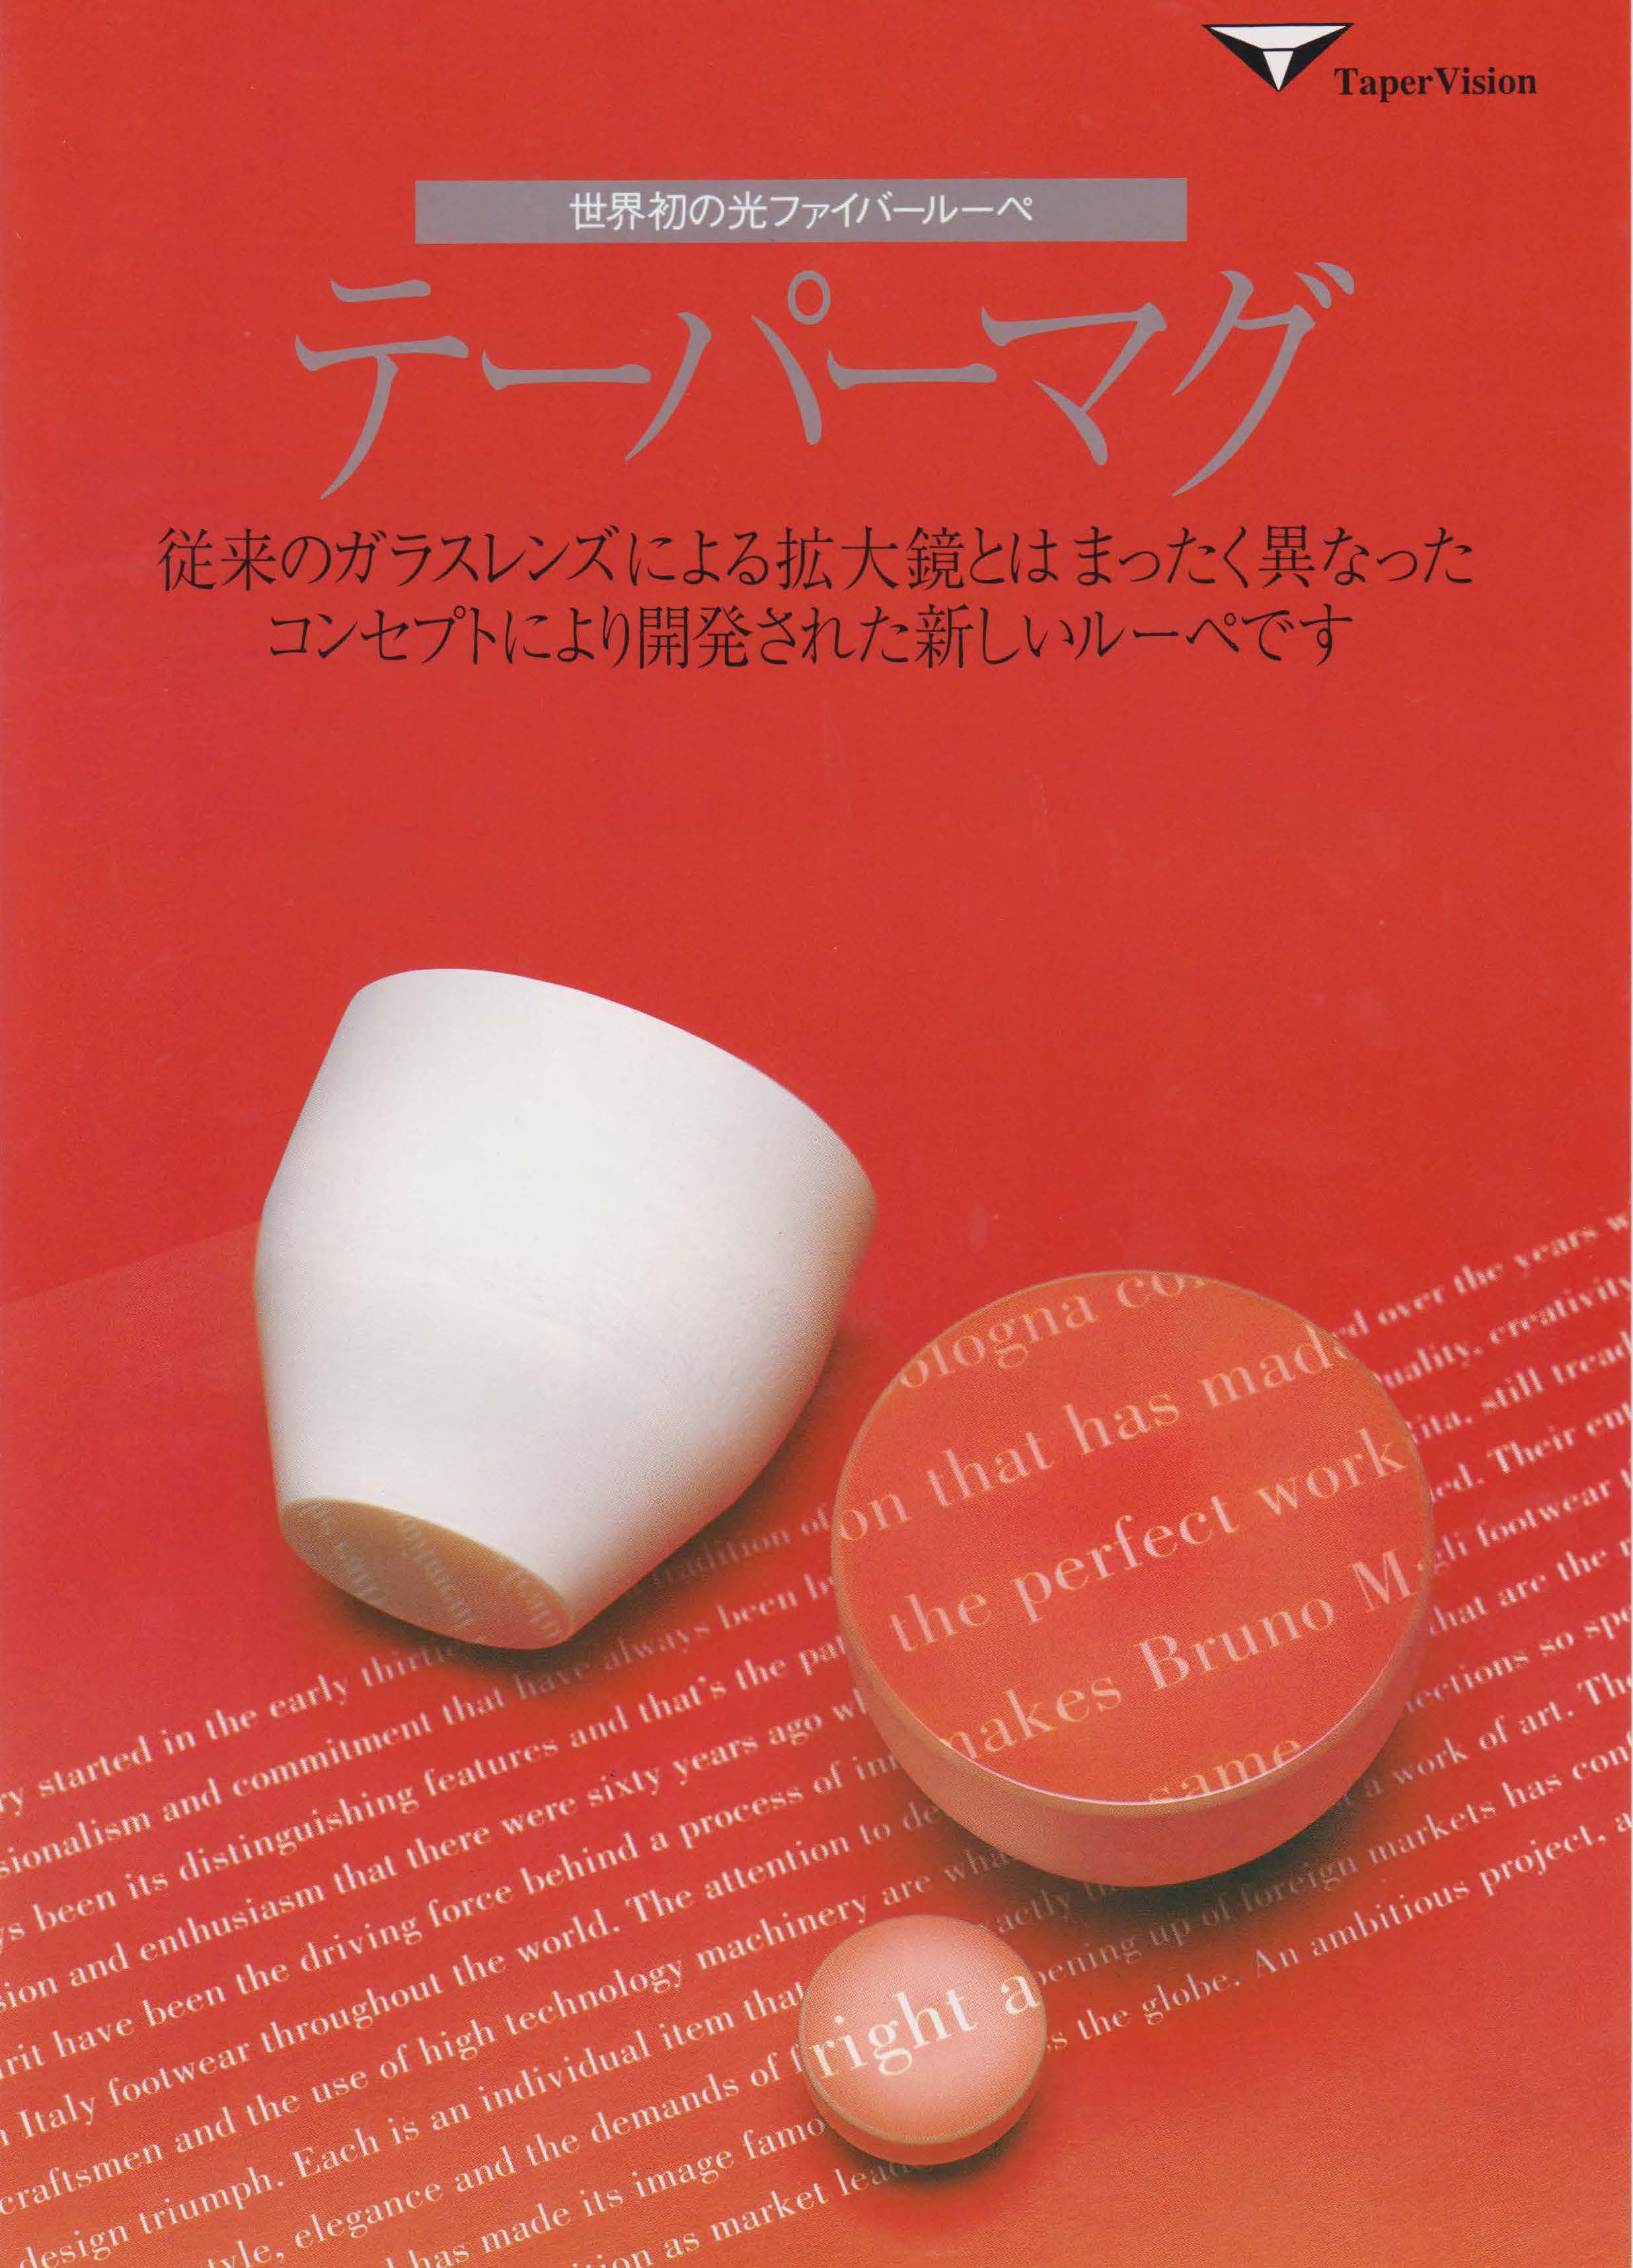 An advertisment for the tapers sold in Japan in the 1990s